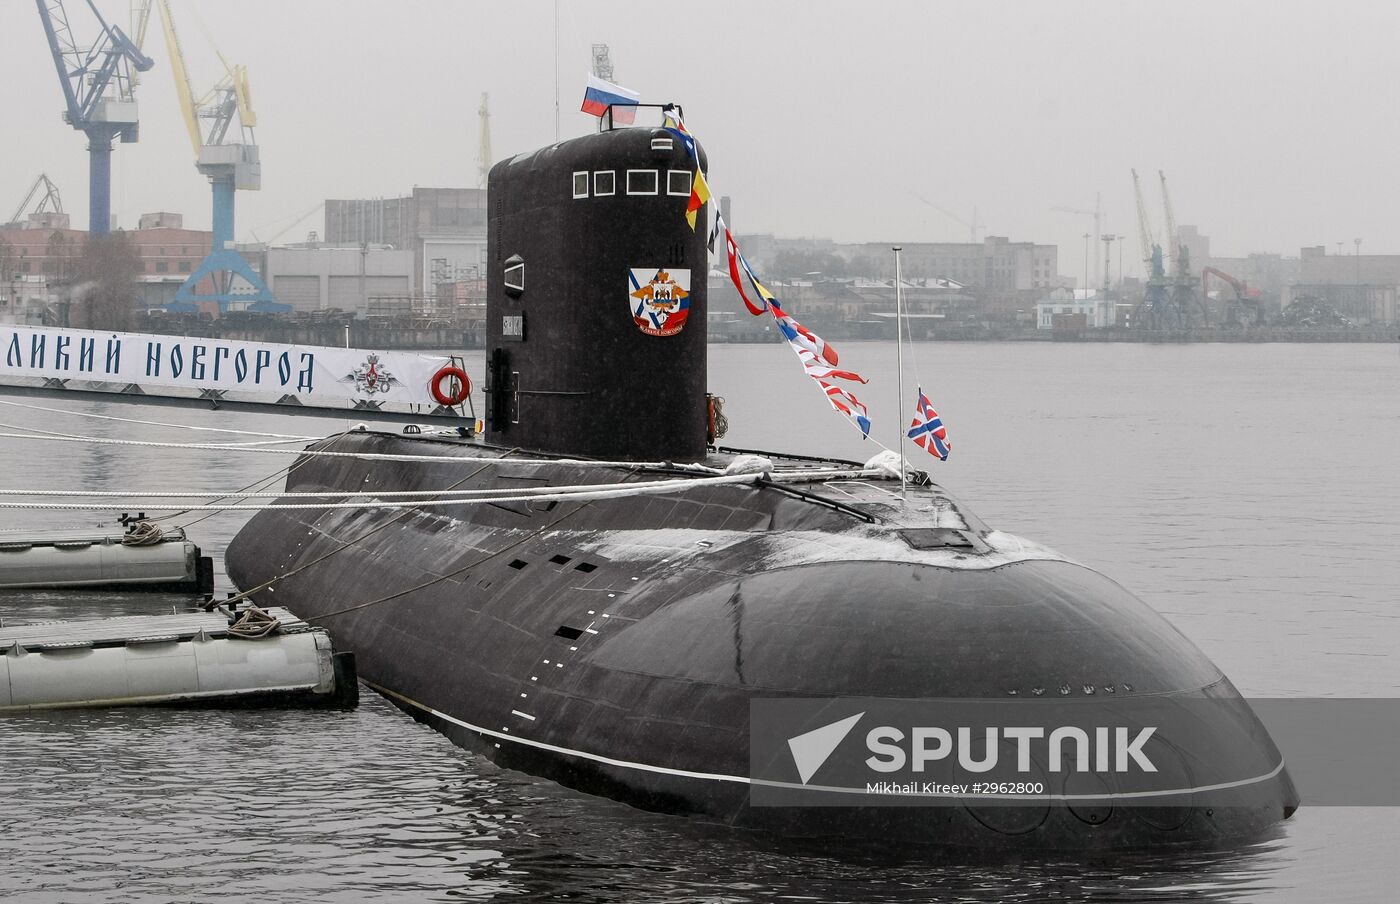 Veliky Novgorod diesel-electric submarine handed over to Russian Navy